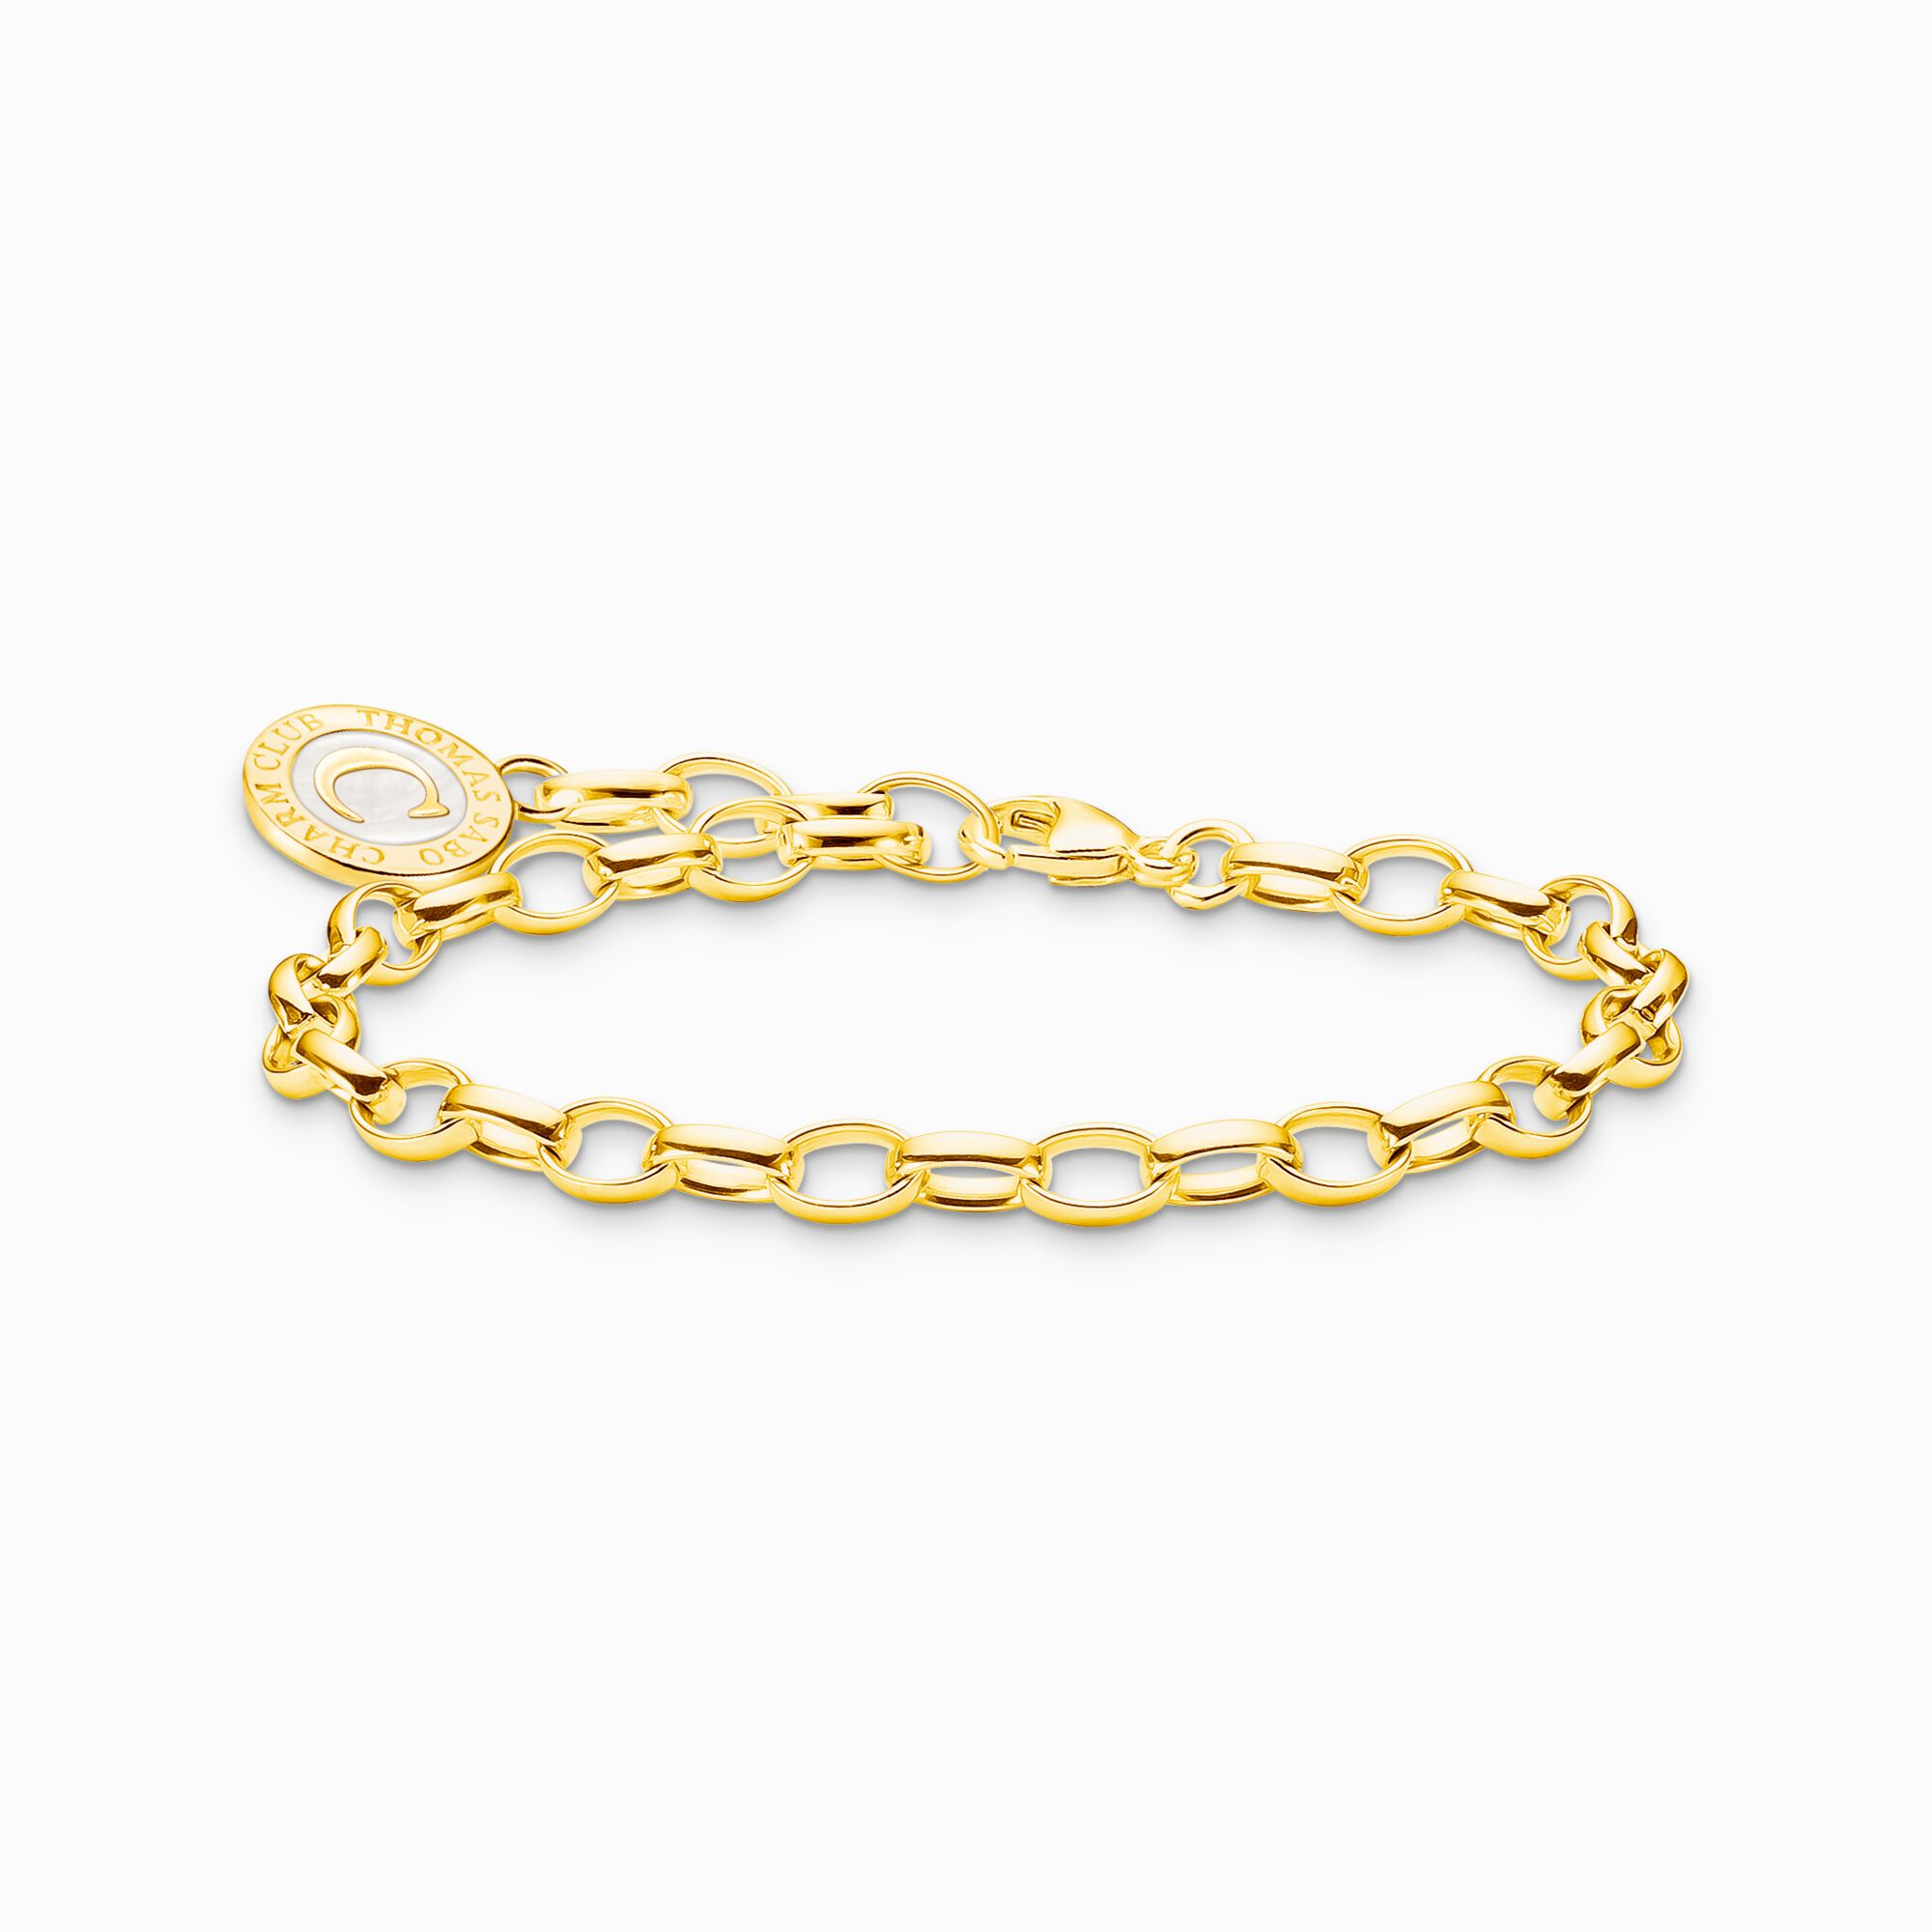 Member Charm bracelet with white Charmista Coin gold plated from the Charm Club collection in the THOMAS SABO online store